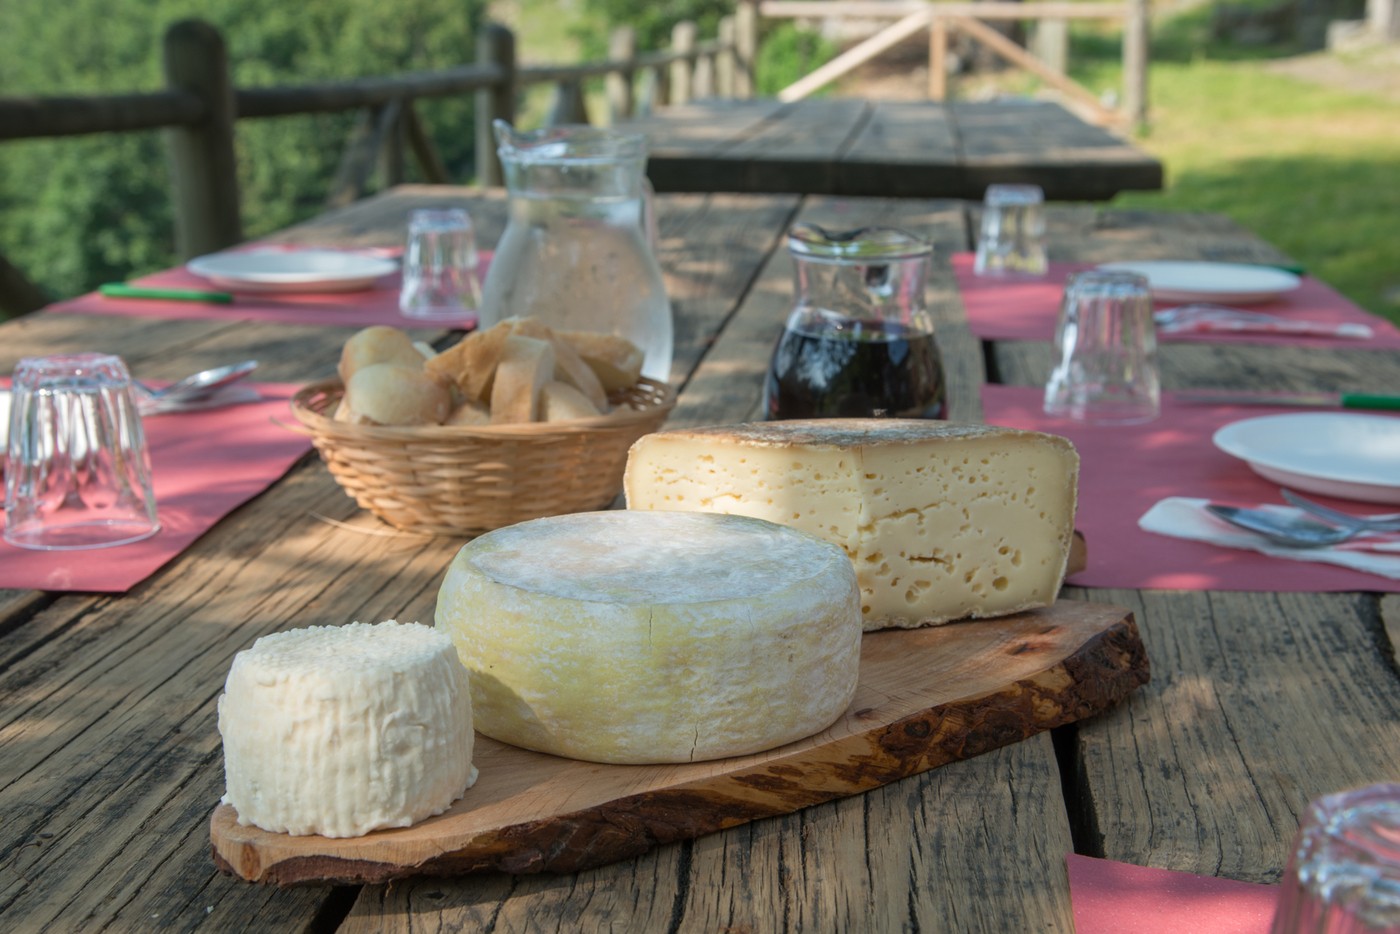 Biella cheeses: keys facts from the diary